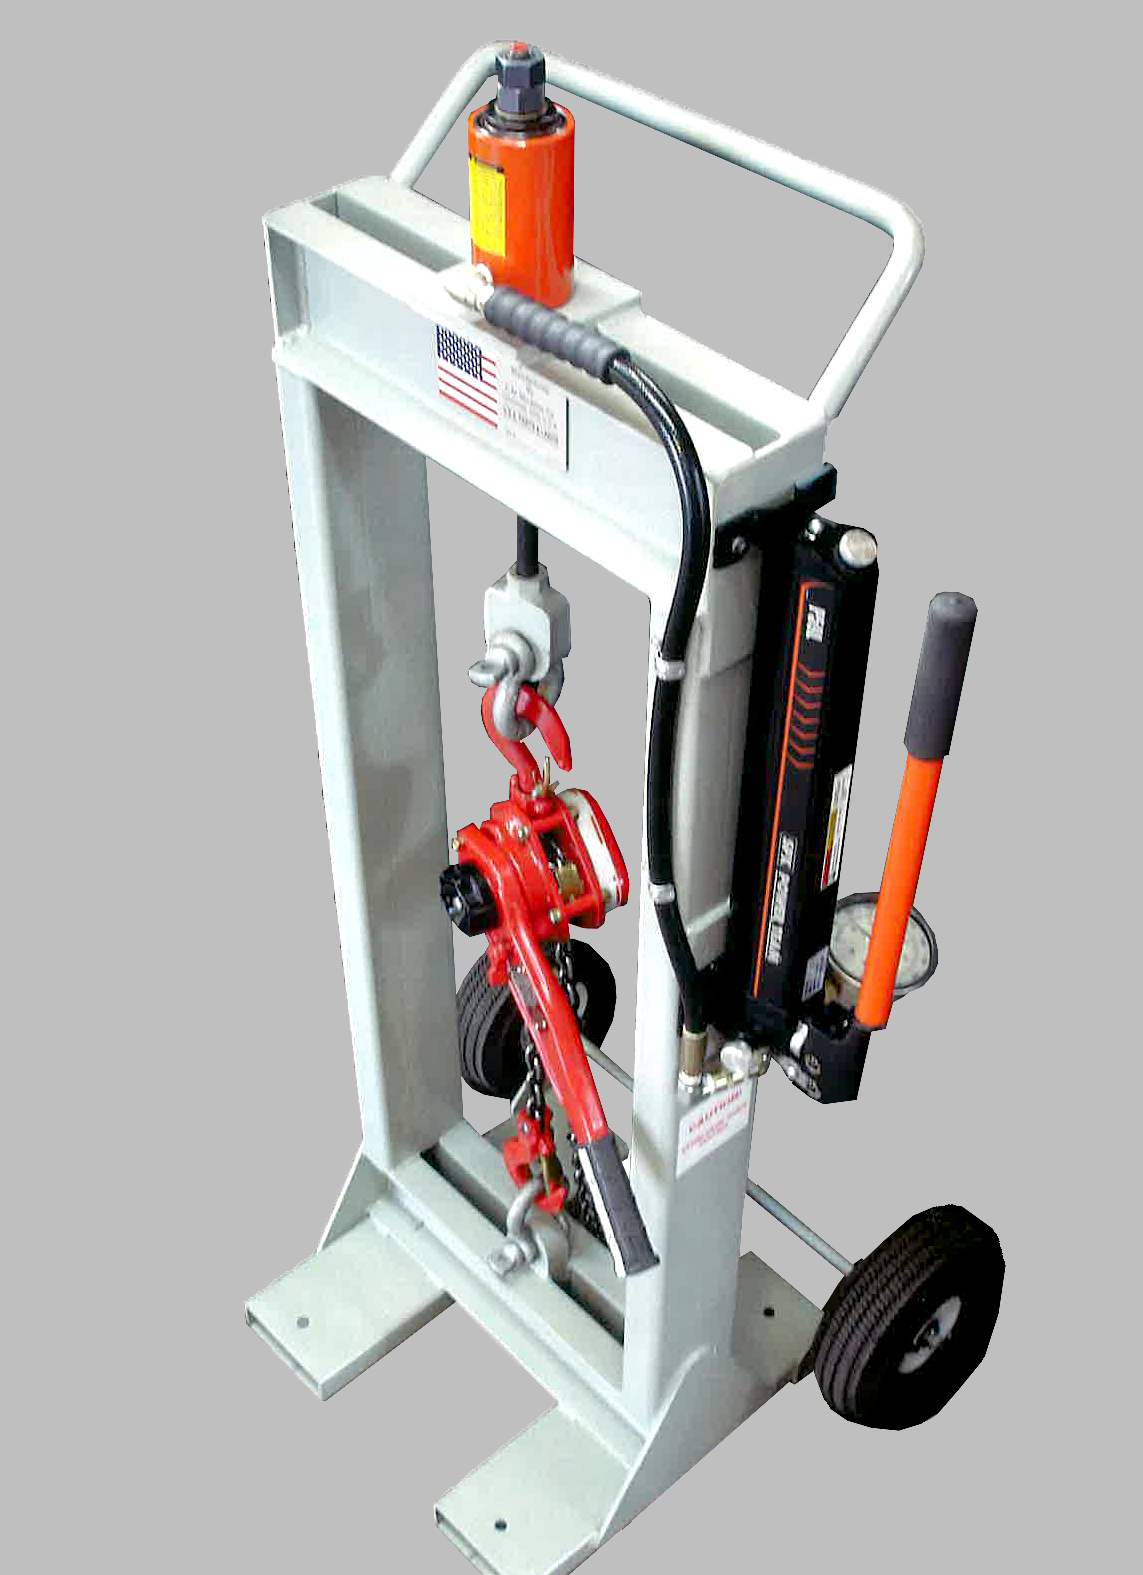 //pridetool.com/wp-content/uploads/2023/05/6-Ton-Pride-Tool-Hoist-and-Lift-Sling-Test-Stand-GrayBG-1.png